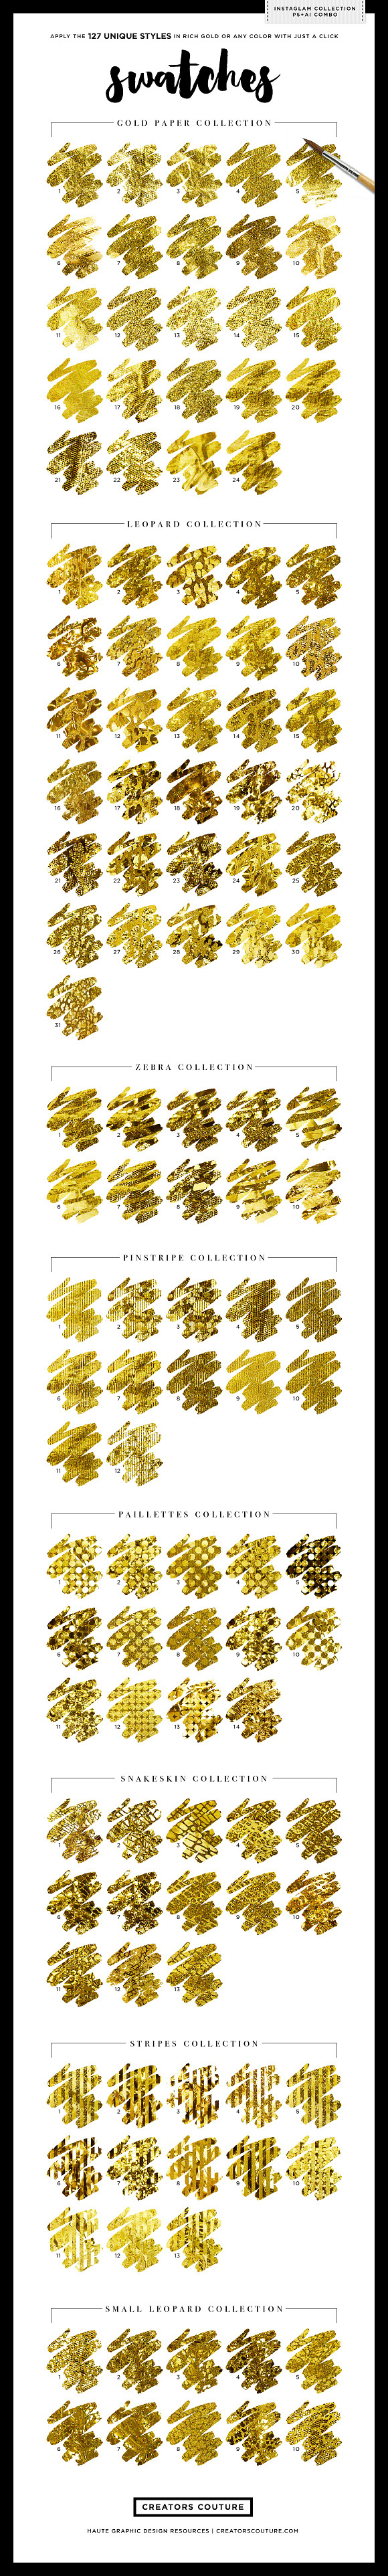 Gold Foil Textures + Styles Bundle in Photoshop Layer Styles - product preview 1